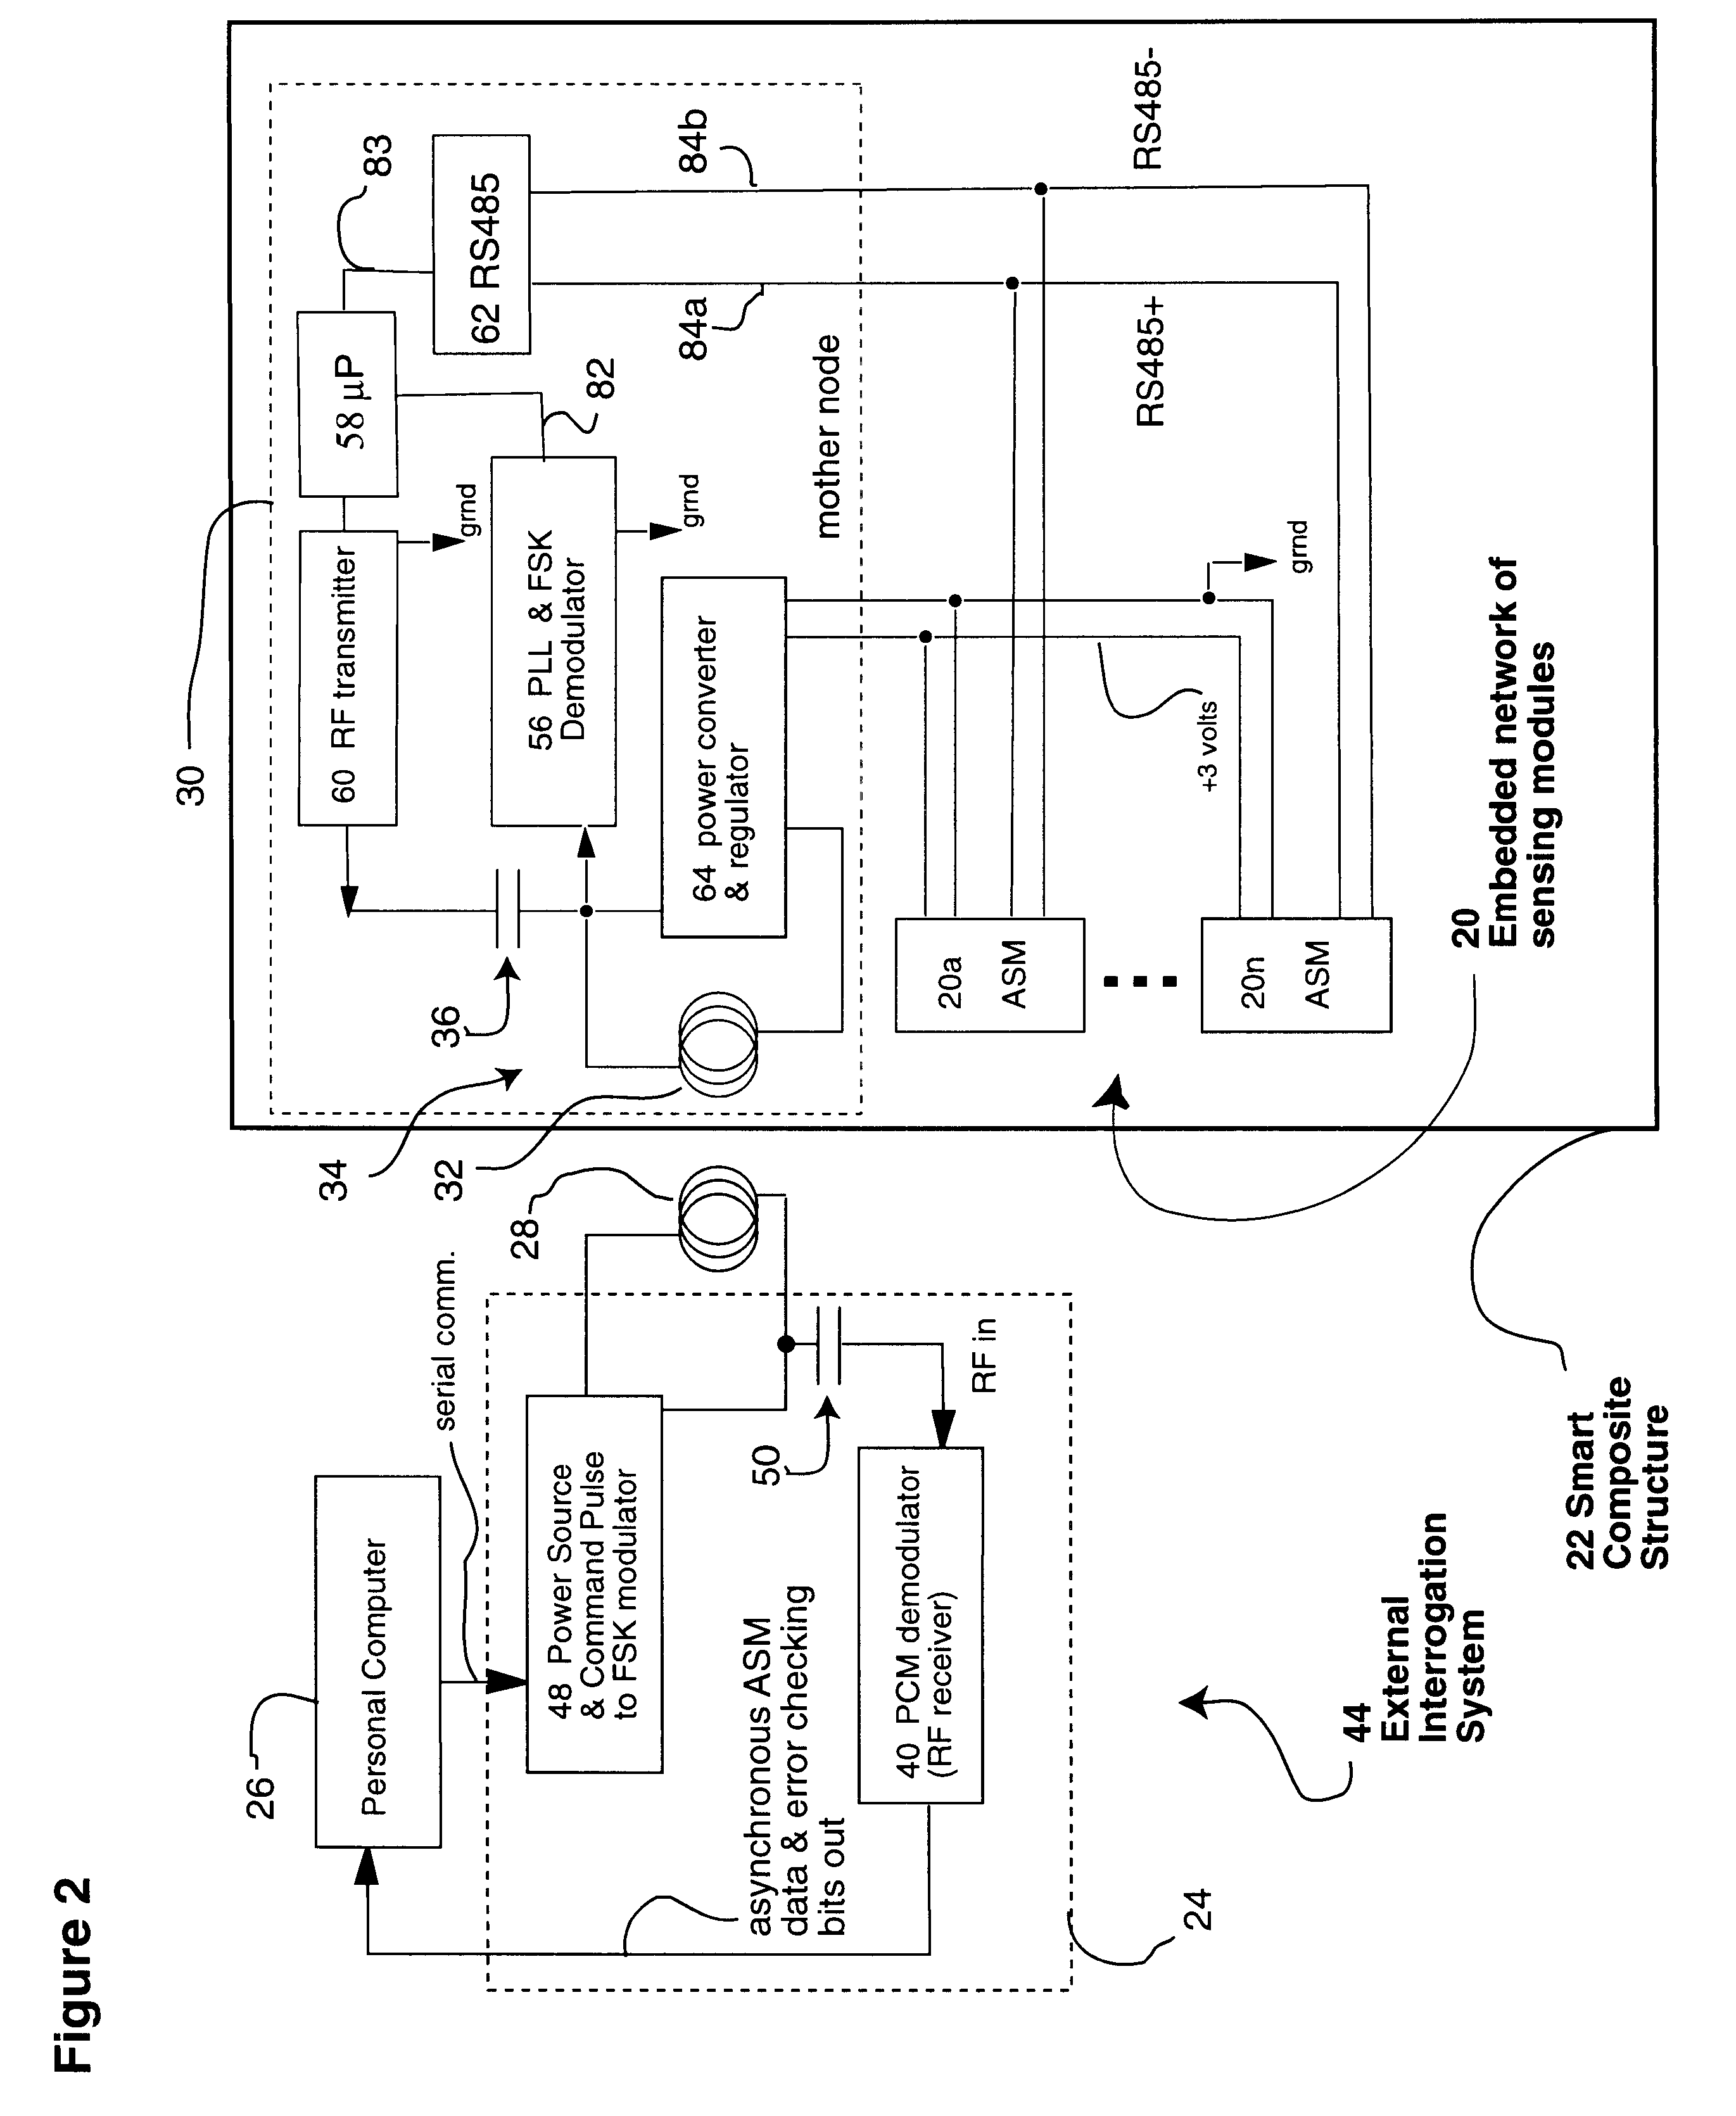 System for remote powering and communication with a network of addressable, multichannel sensing modules